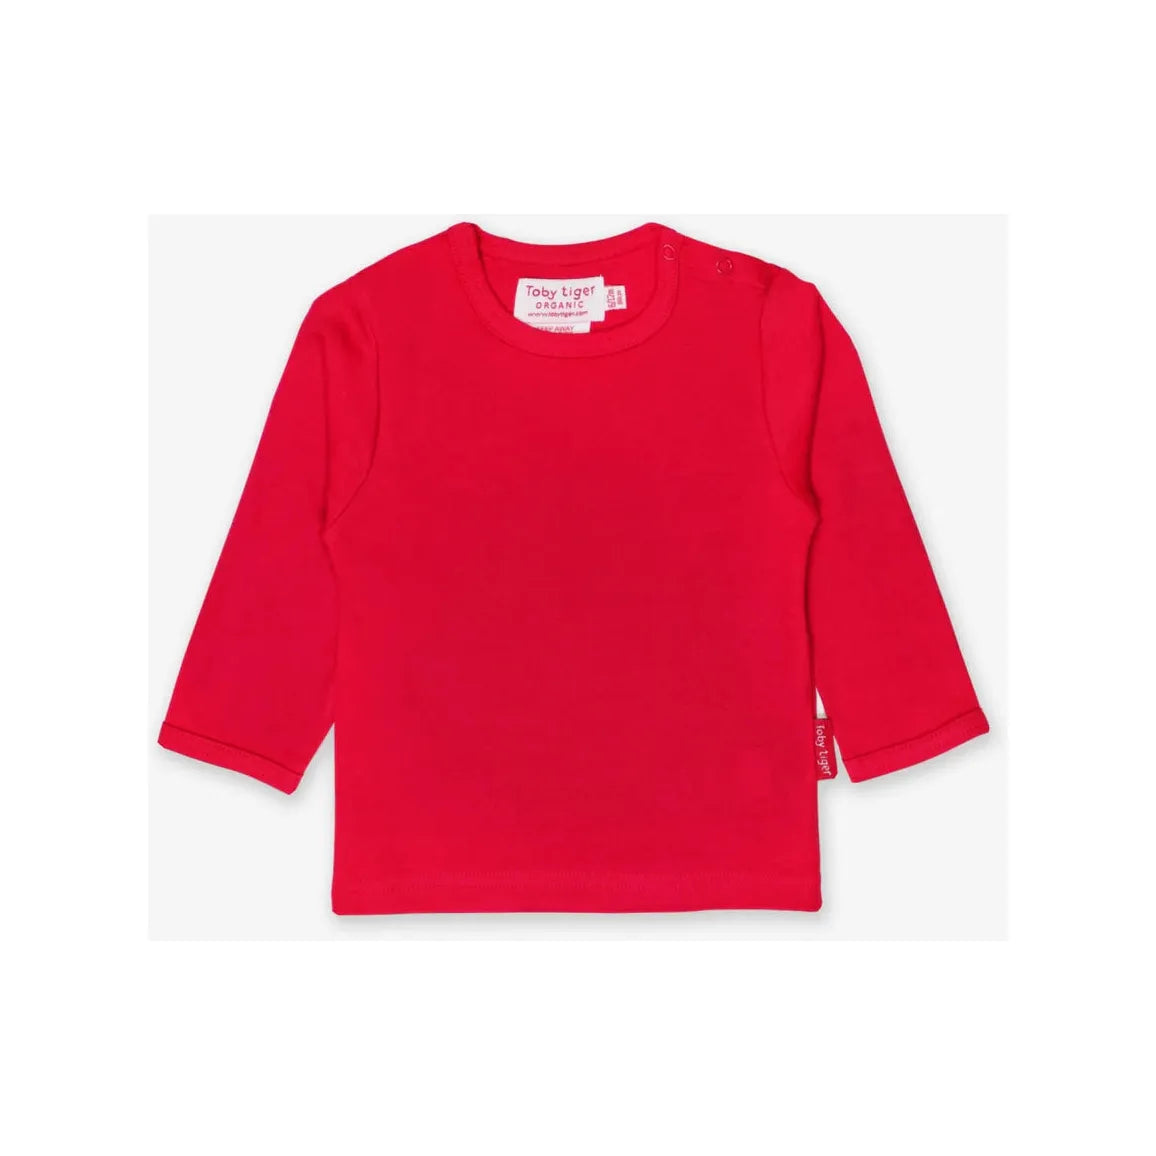 Toby Tiger Basic Long Sleeve Red T-Shirt